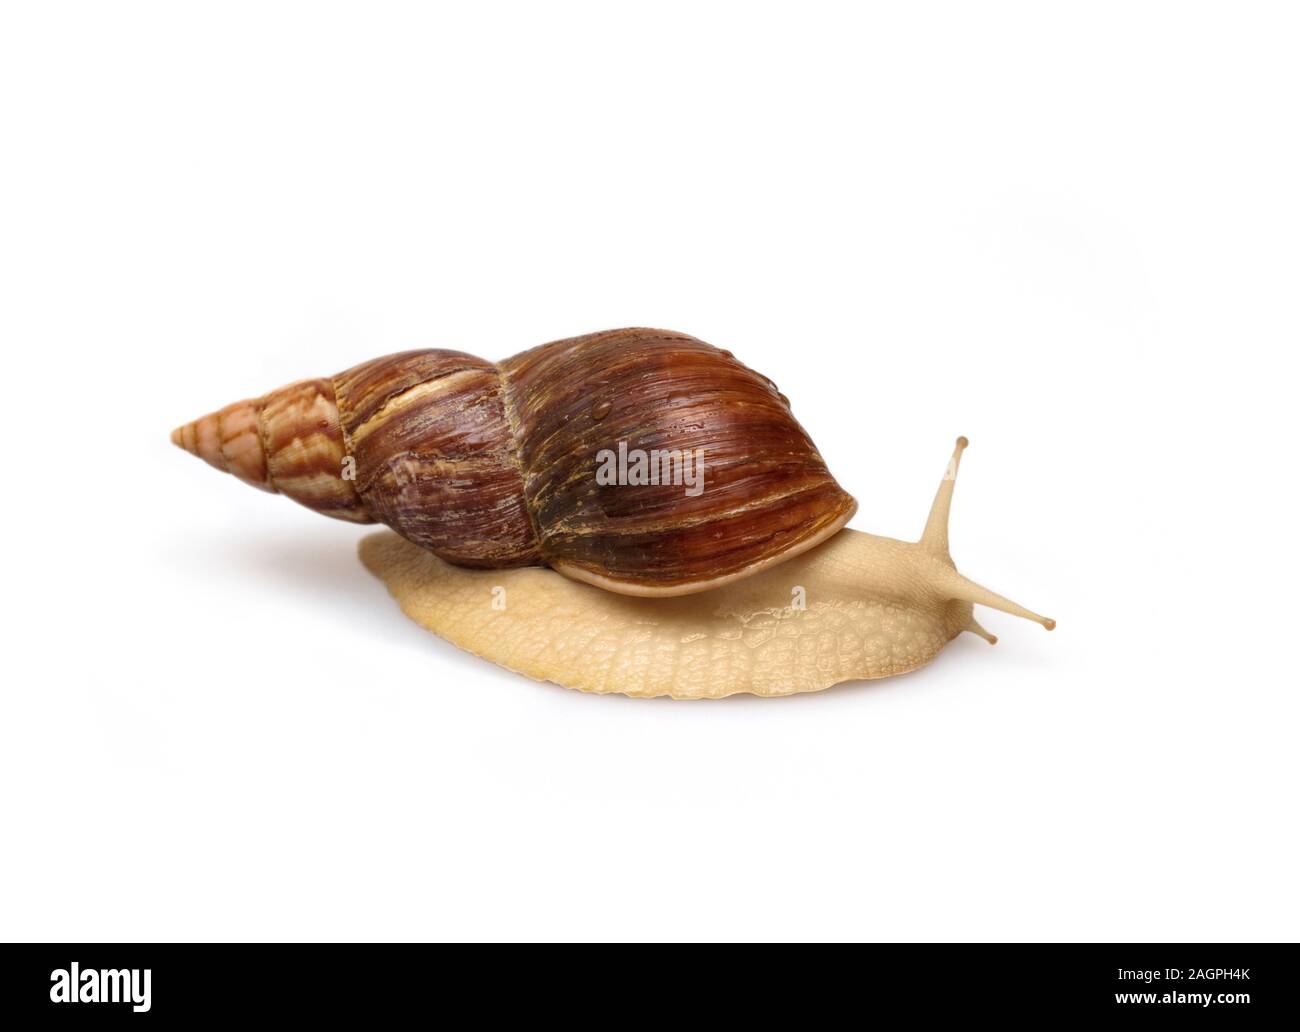 Giant African snail Achatina on white background. Tropical snail Achatina fulica with shell. Achatina snail closeup. Macro, side view. Stock Photo